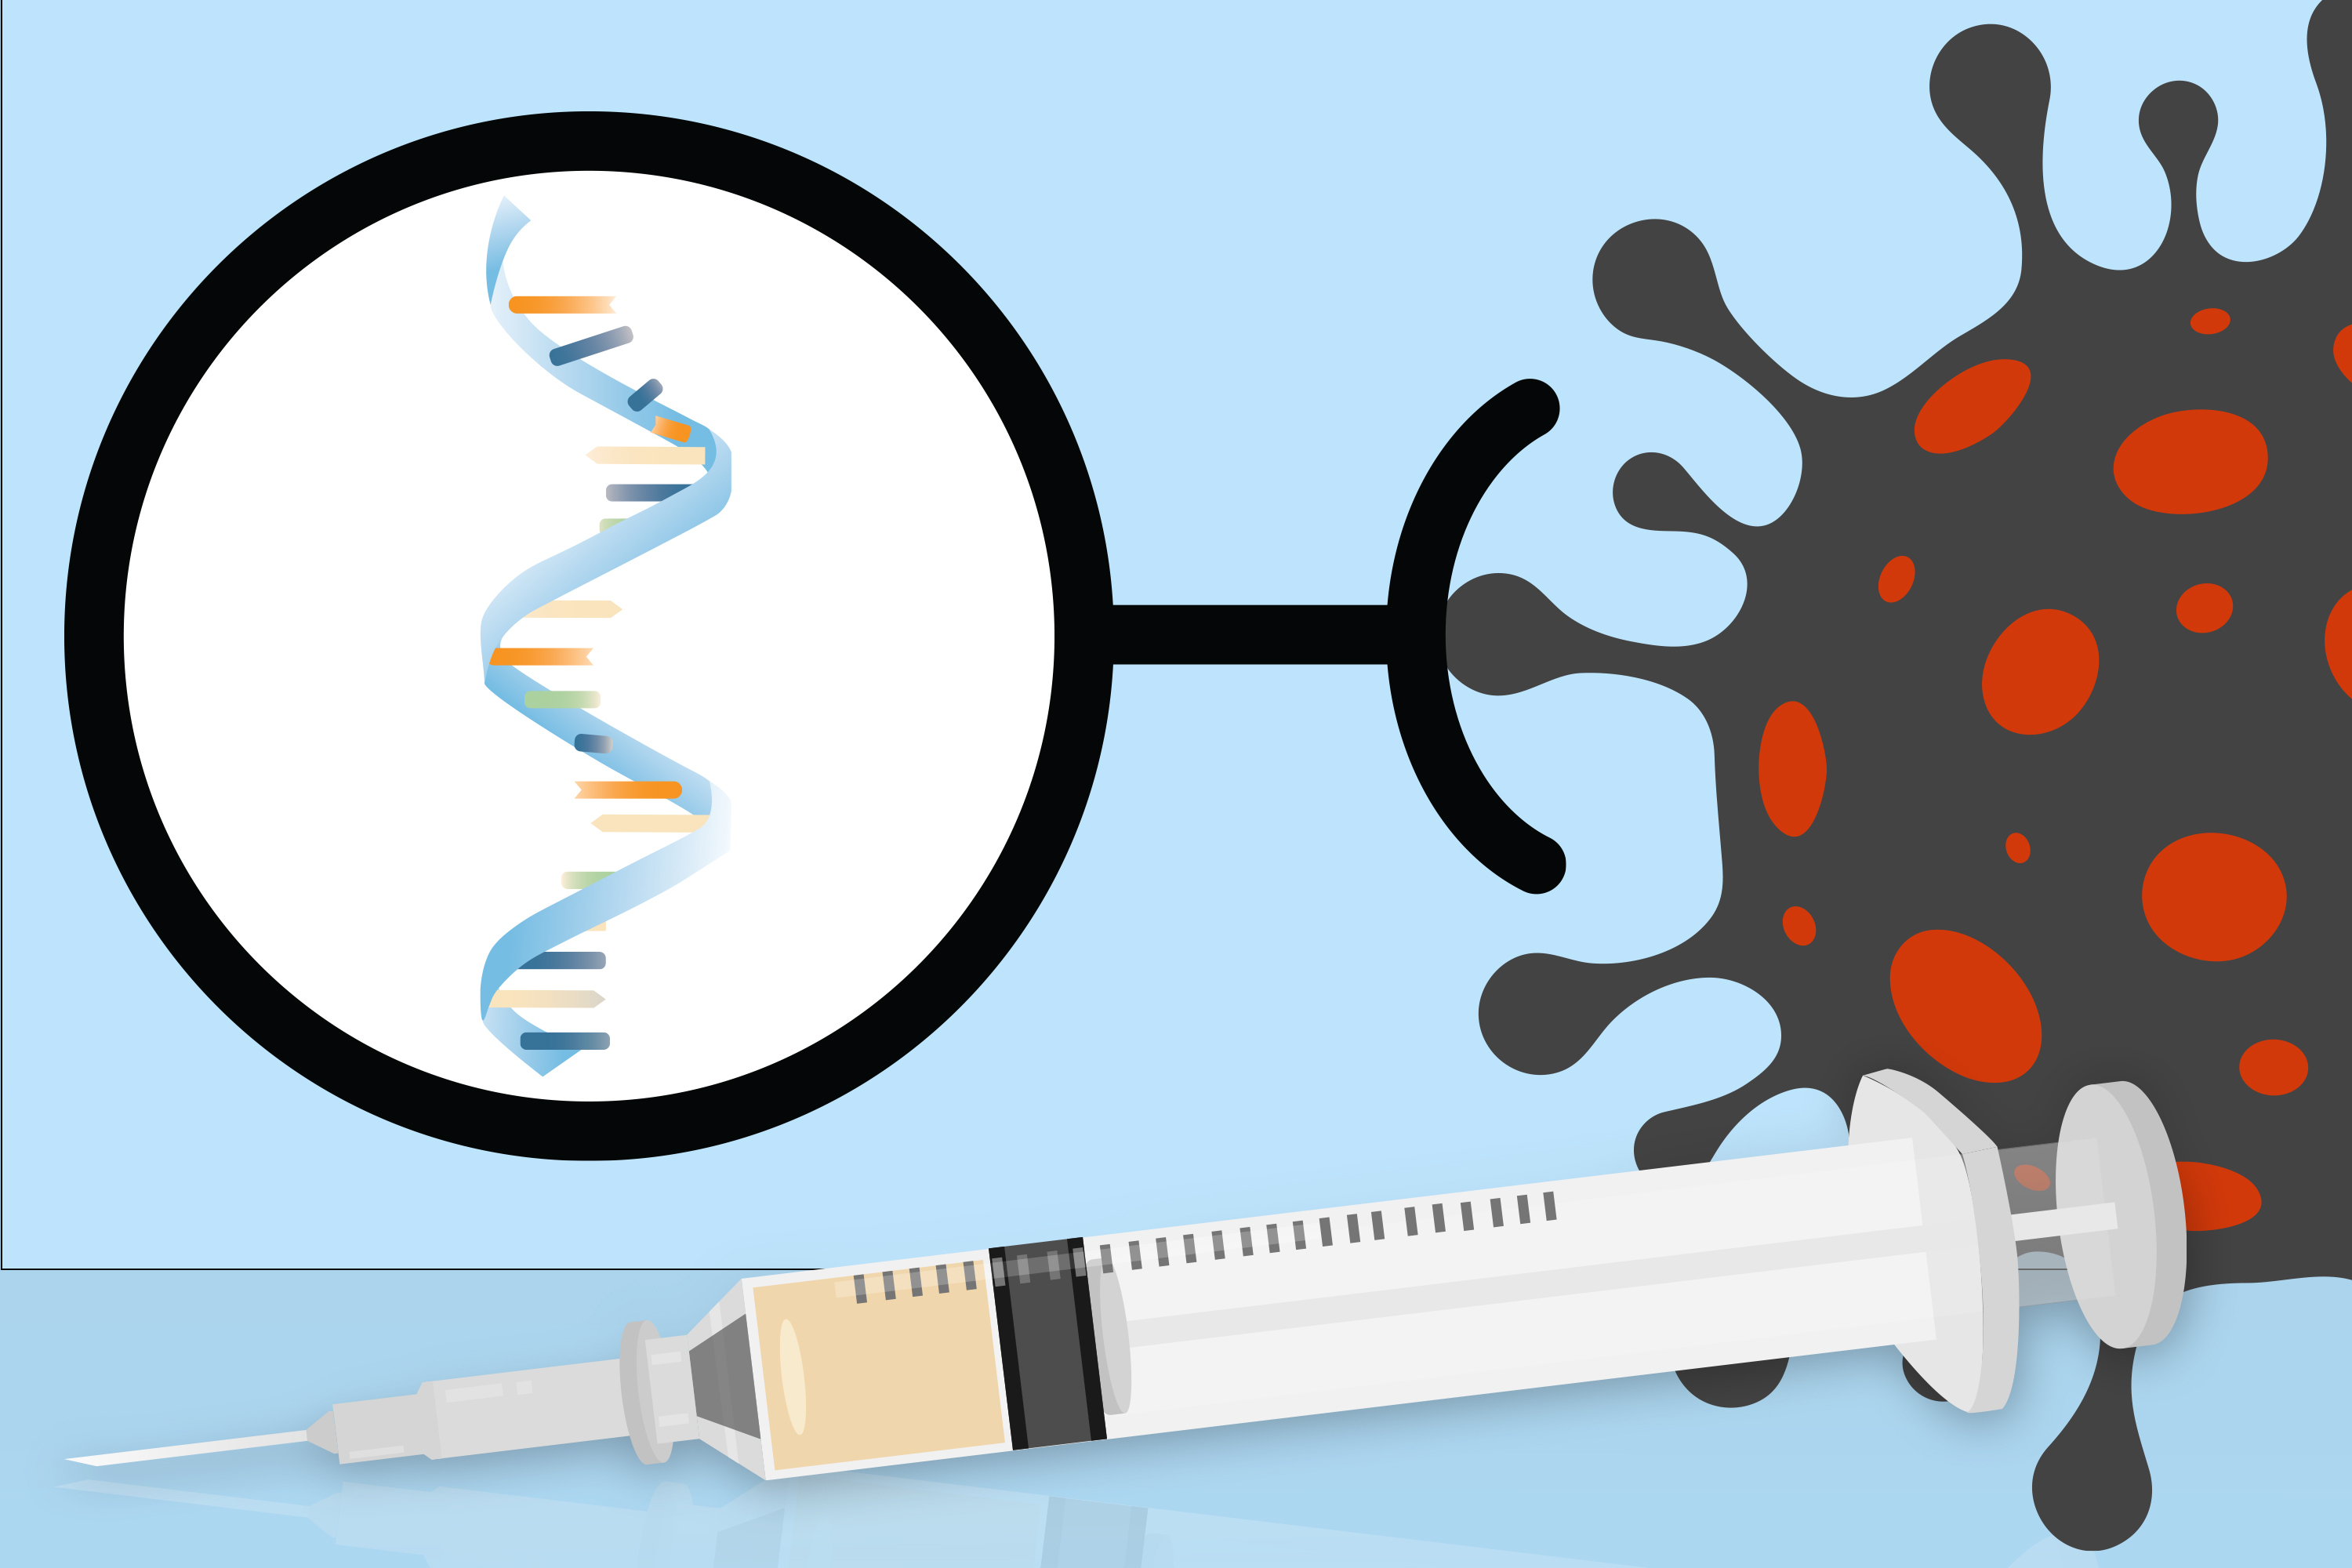 Explained: Why RNA vaccines for Covid-19 raced to the front of the pack | MIT News